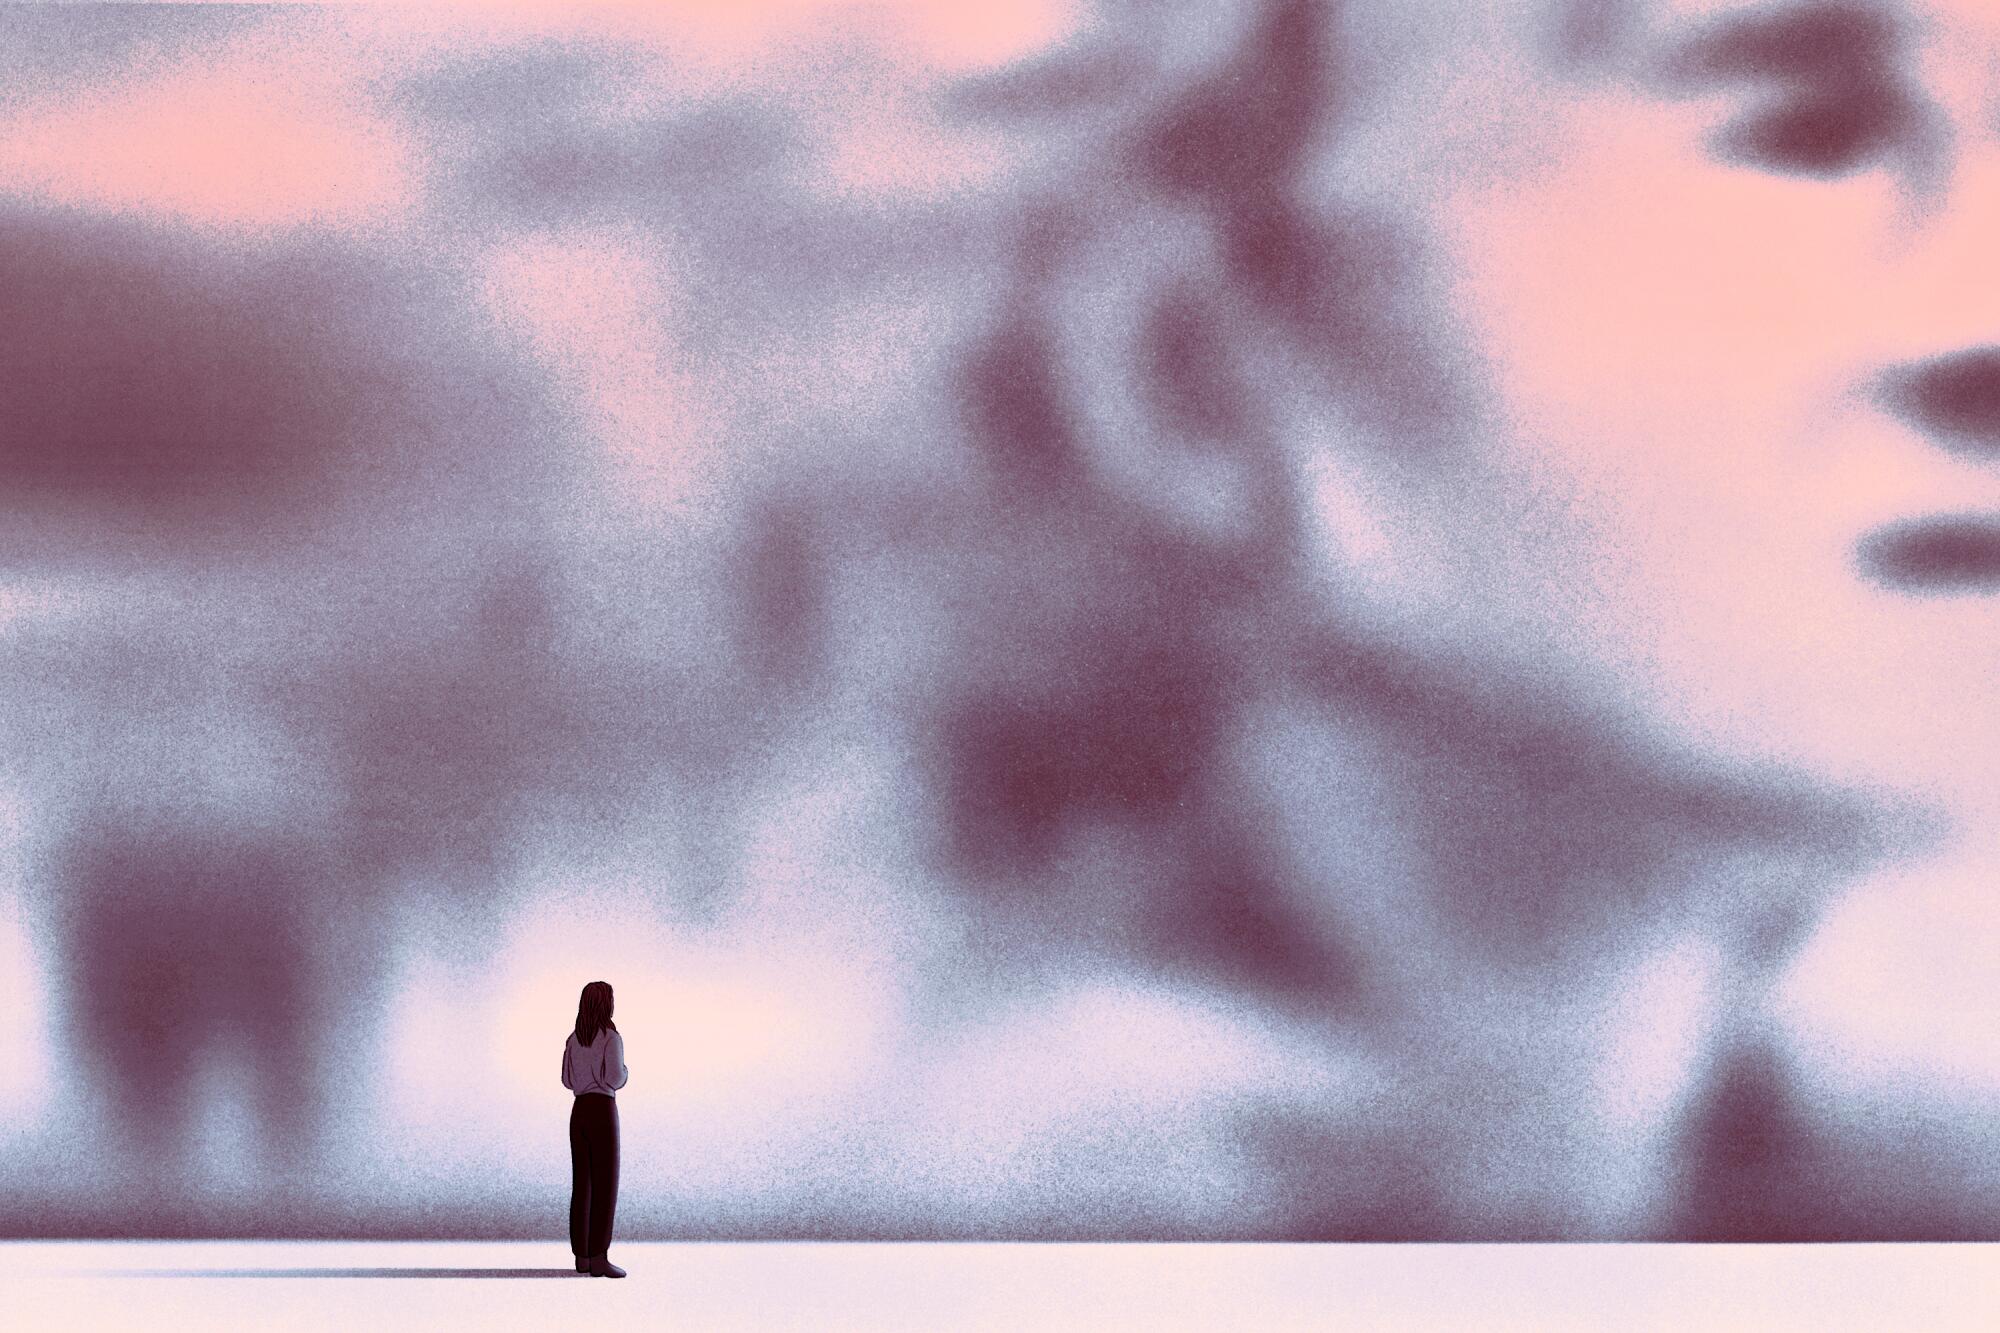 Illustration of a small figure looking at a large blurry background image of her friend